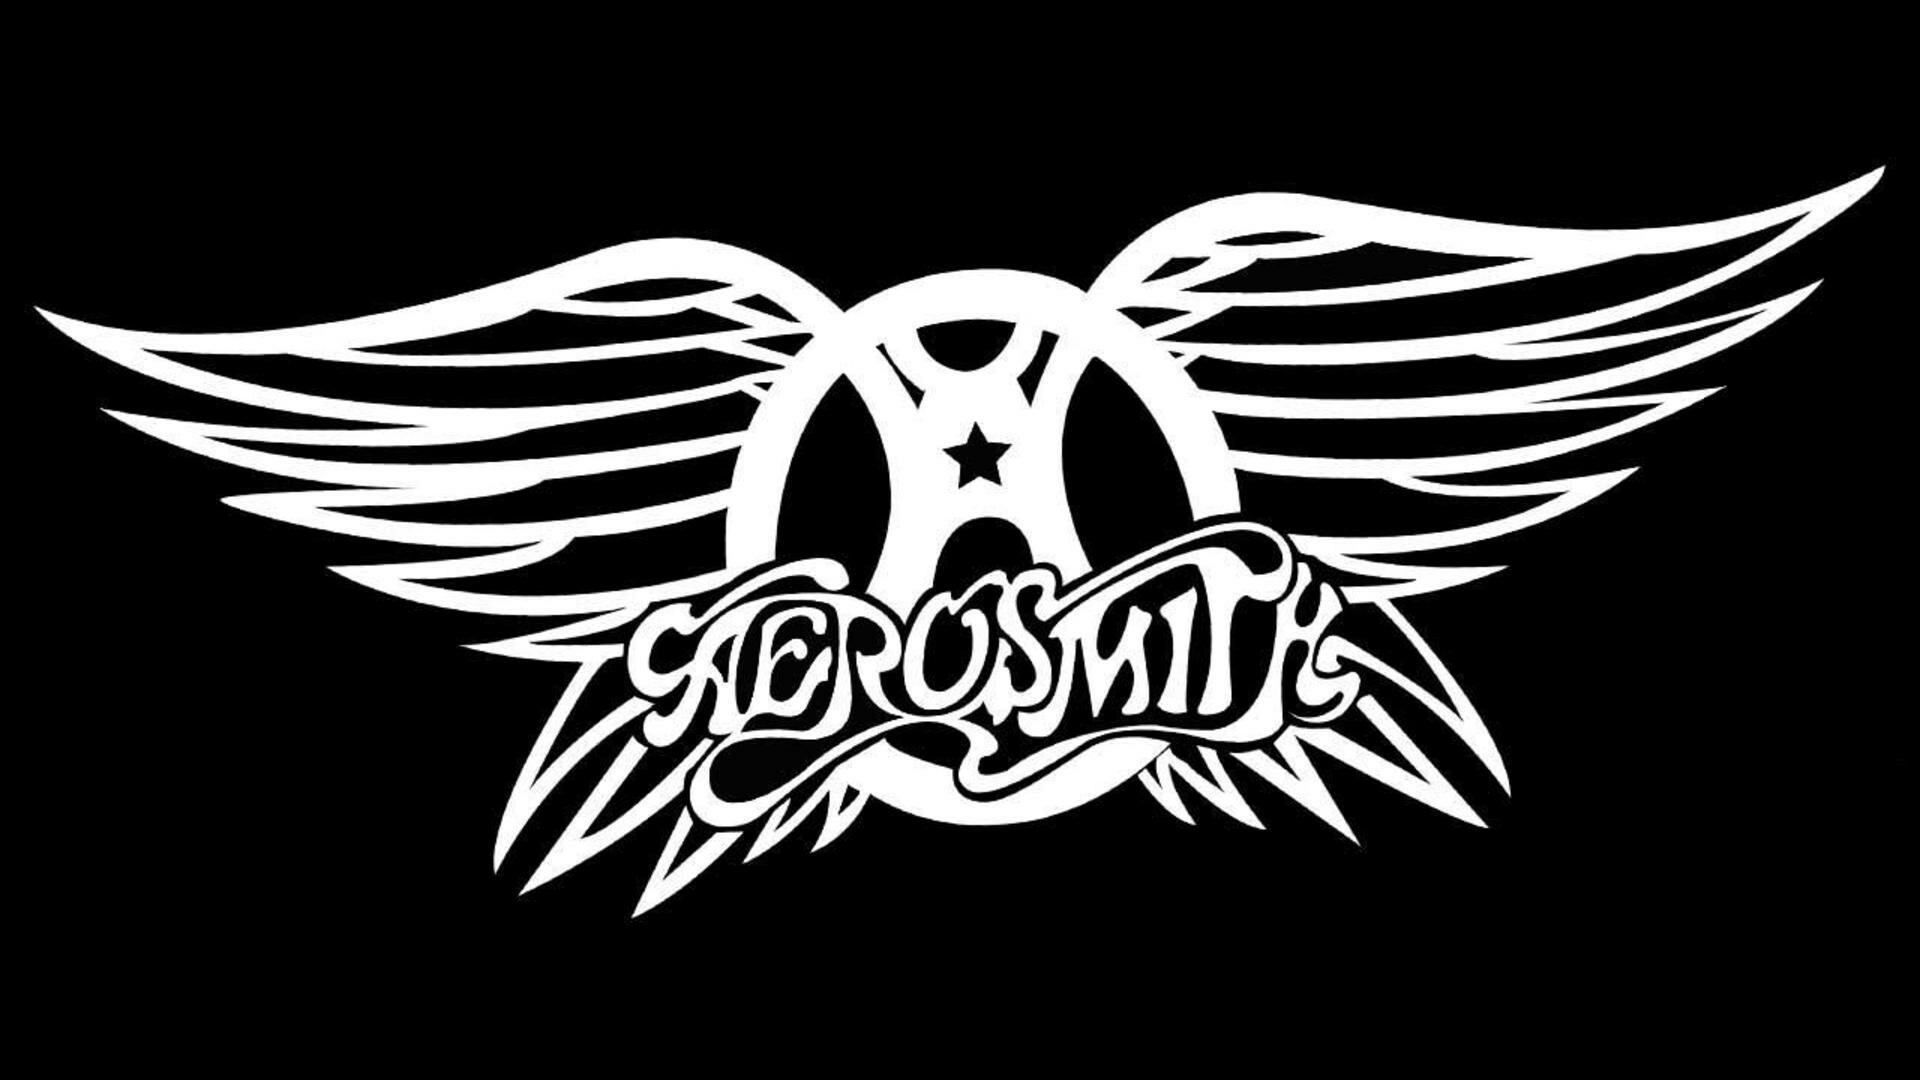 Aerosmith: "Love in an Elevator" became the band's first song to hit number one on the Mainstream Rock Tracks chart. 1920x1080 Full HD Wallpaper.